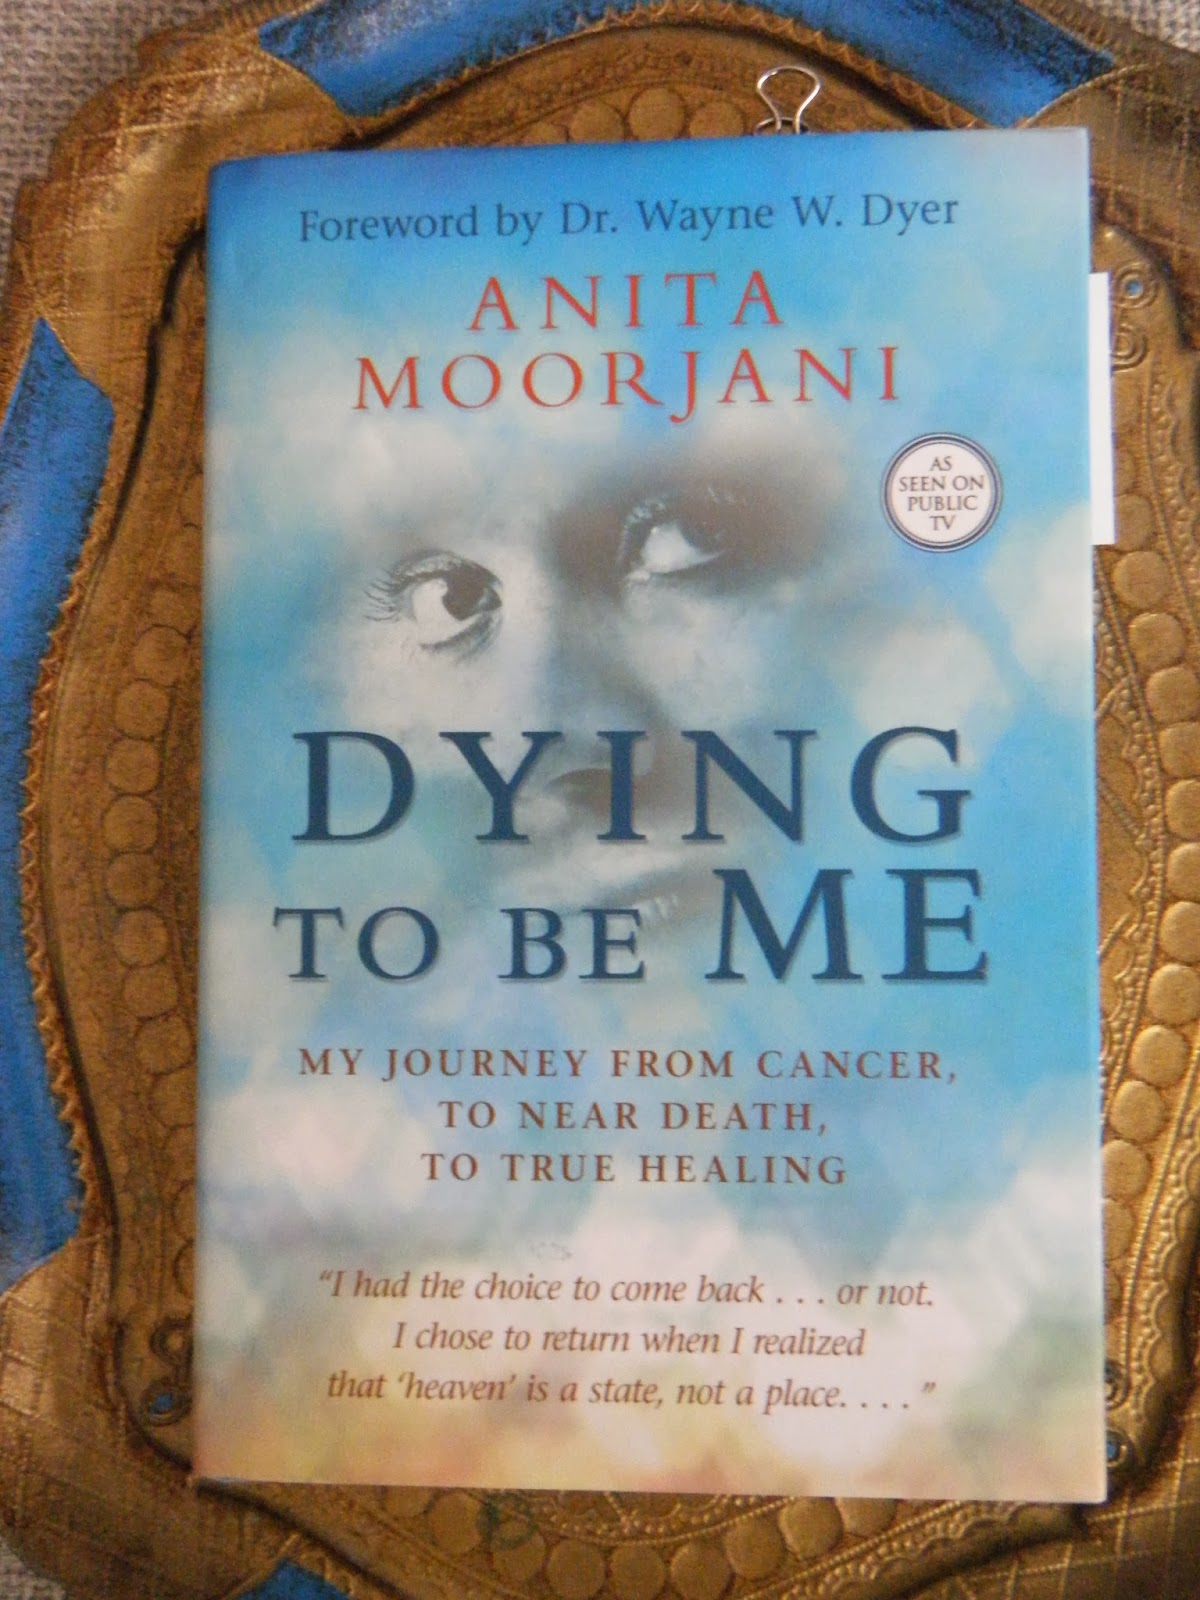 http://www.bookdepository.com/Dying-be-Me-Anita-Moorjani/9781401937539/?a_aid=360